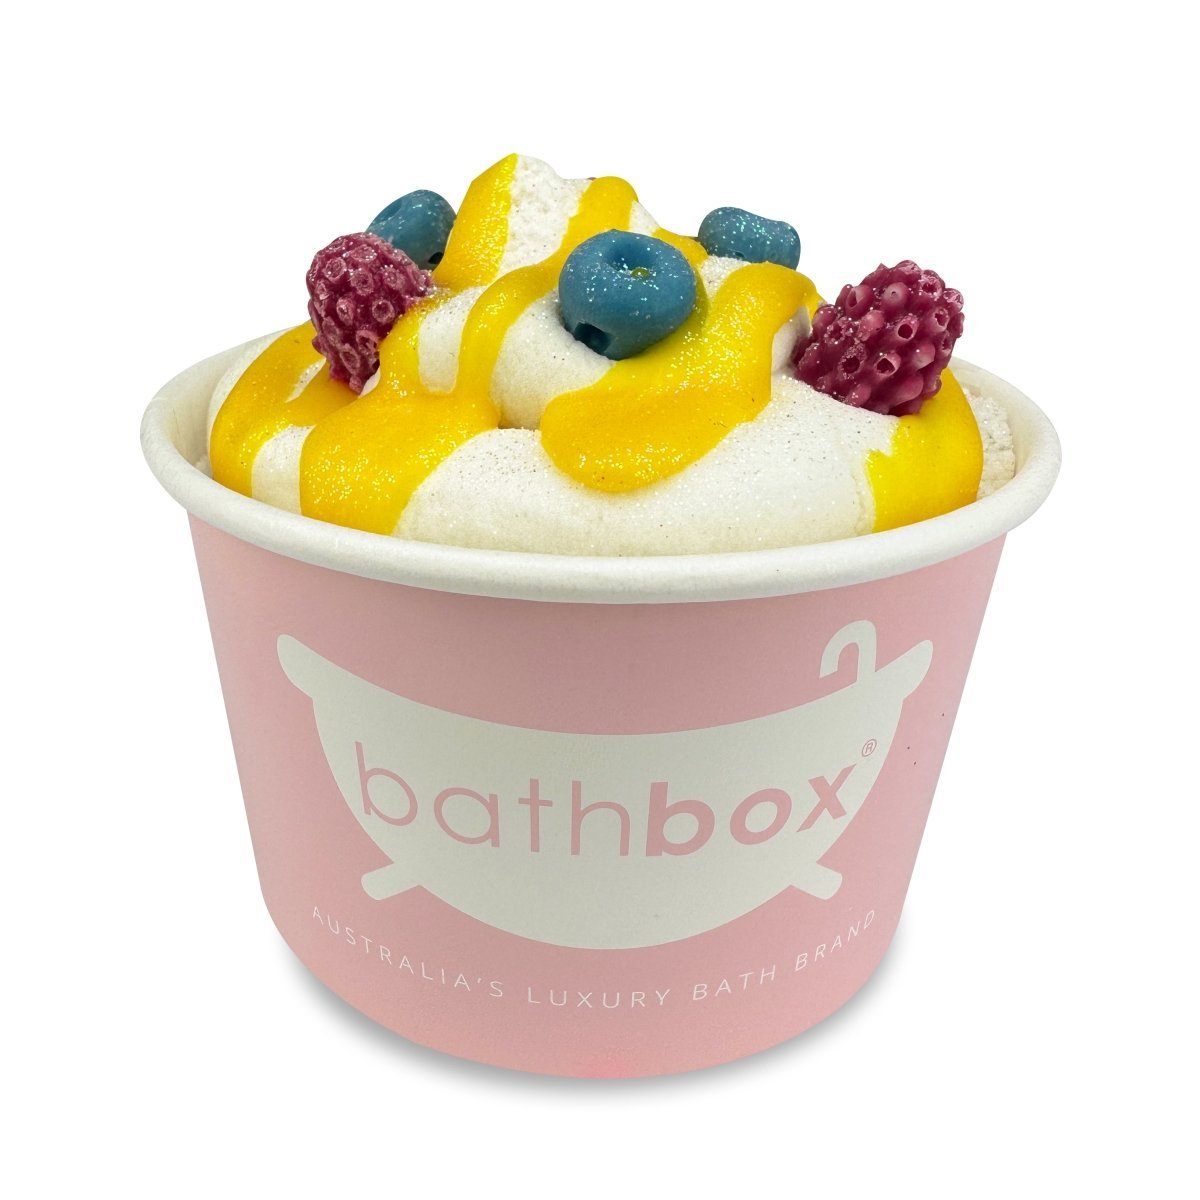 Pavlova Bath Bomb Ice Cream Cup for Kids & Adults - Large Colourful Glitter & Sprinkles - Made in Australia by Bath Box